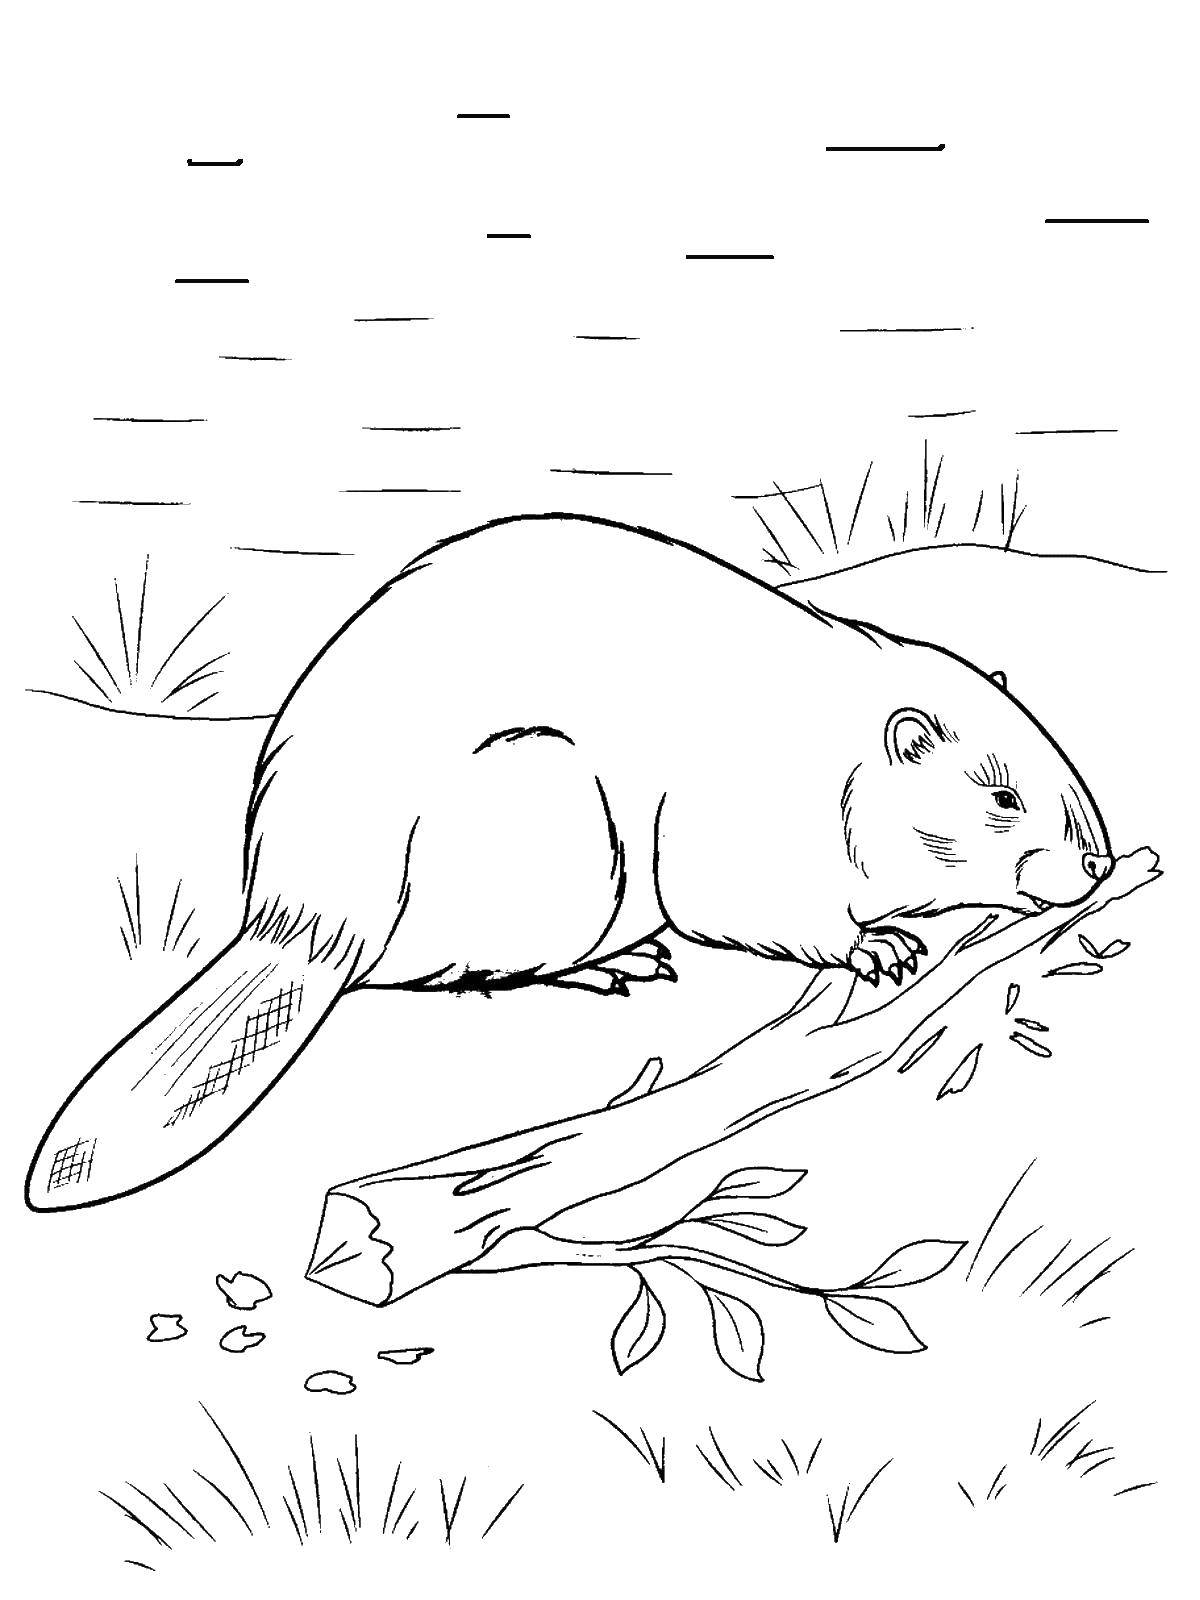 Coloring Beaver. Category wild animals. Tags:  beaver.